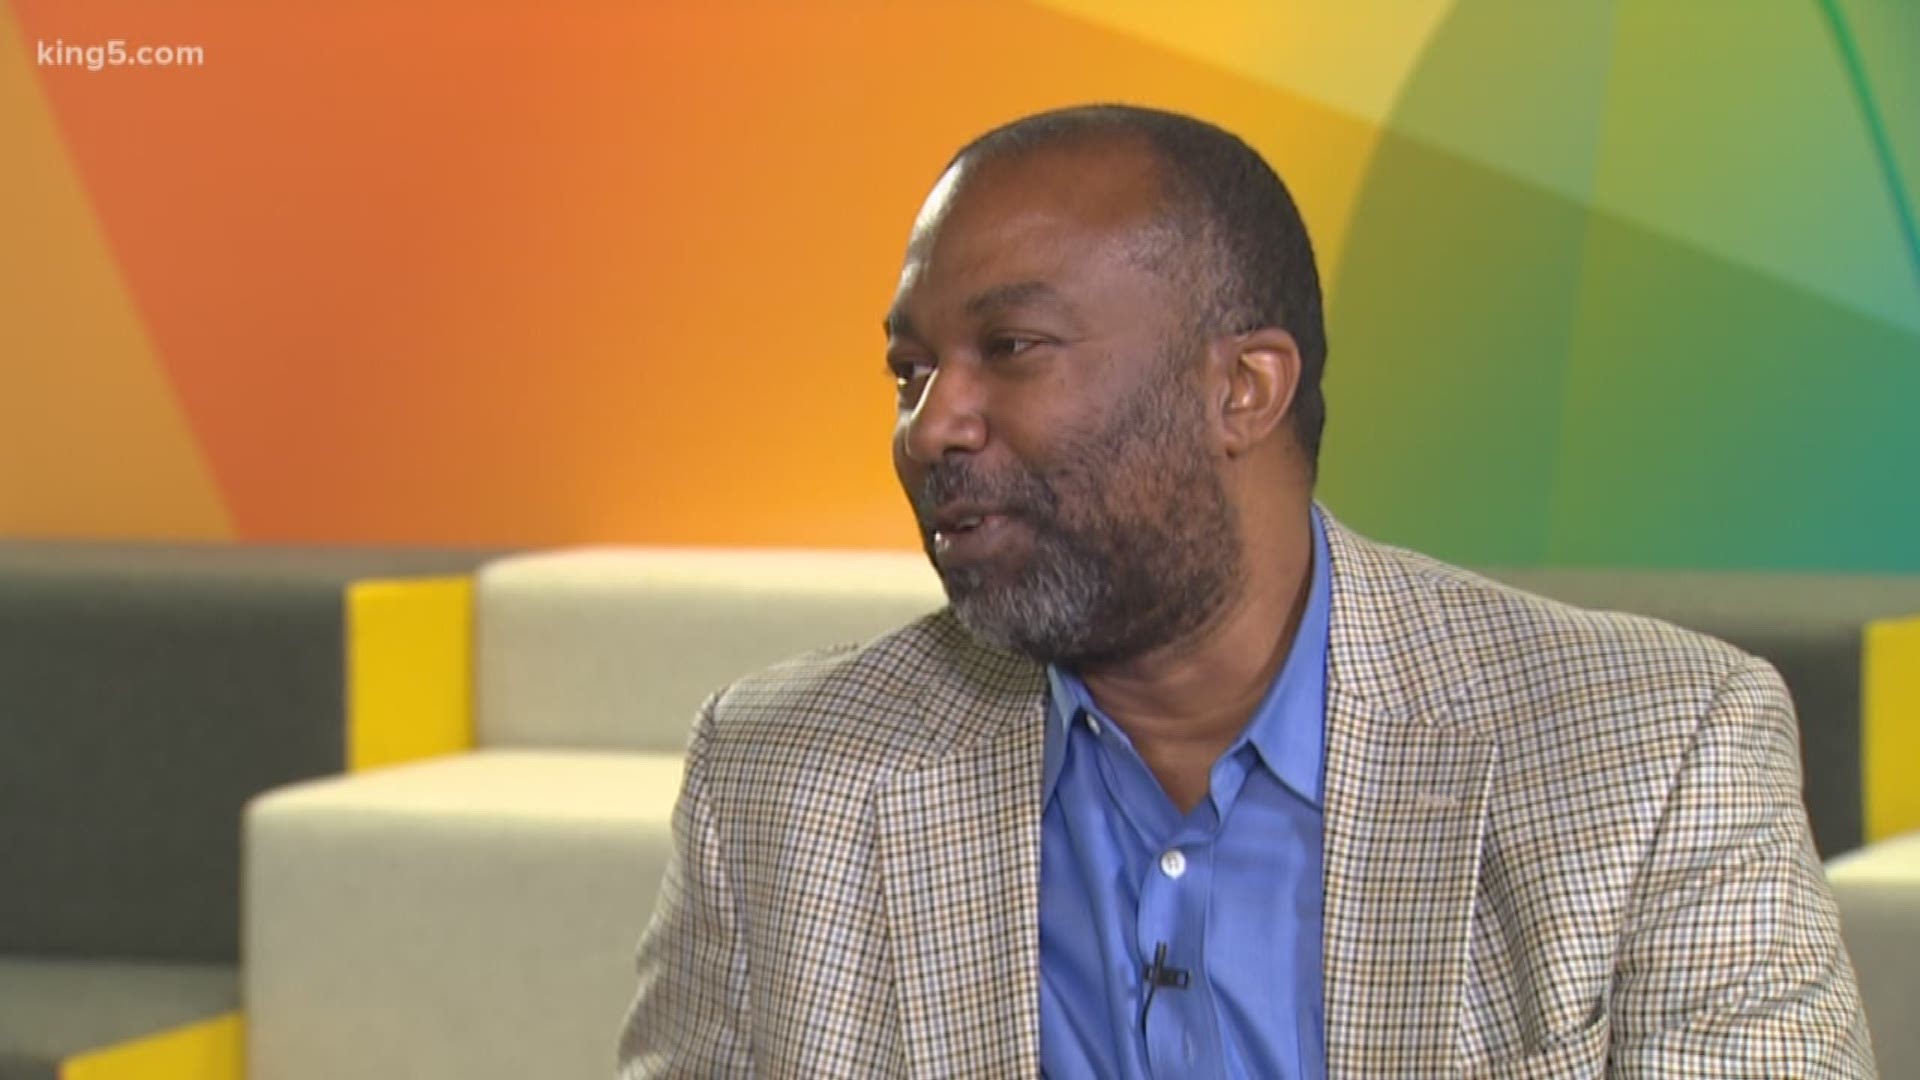 Seattle's Chief Librarian Marcellus Turner on what levy means | king5.com